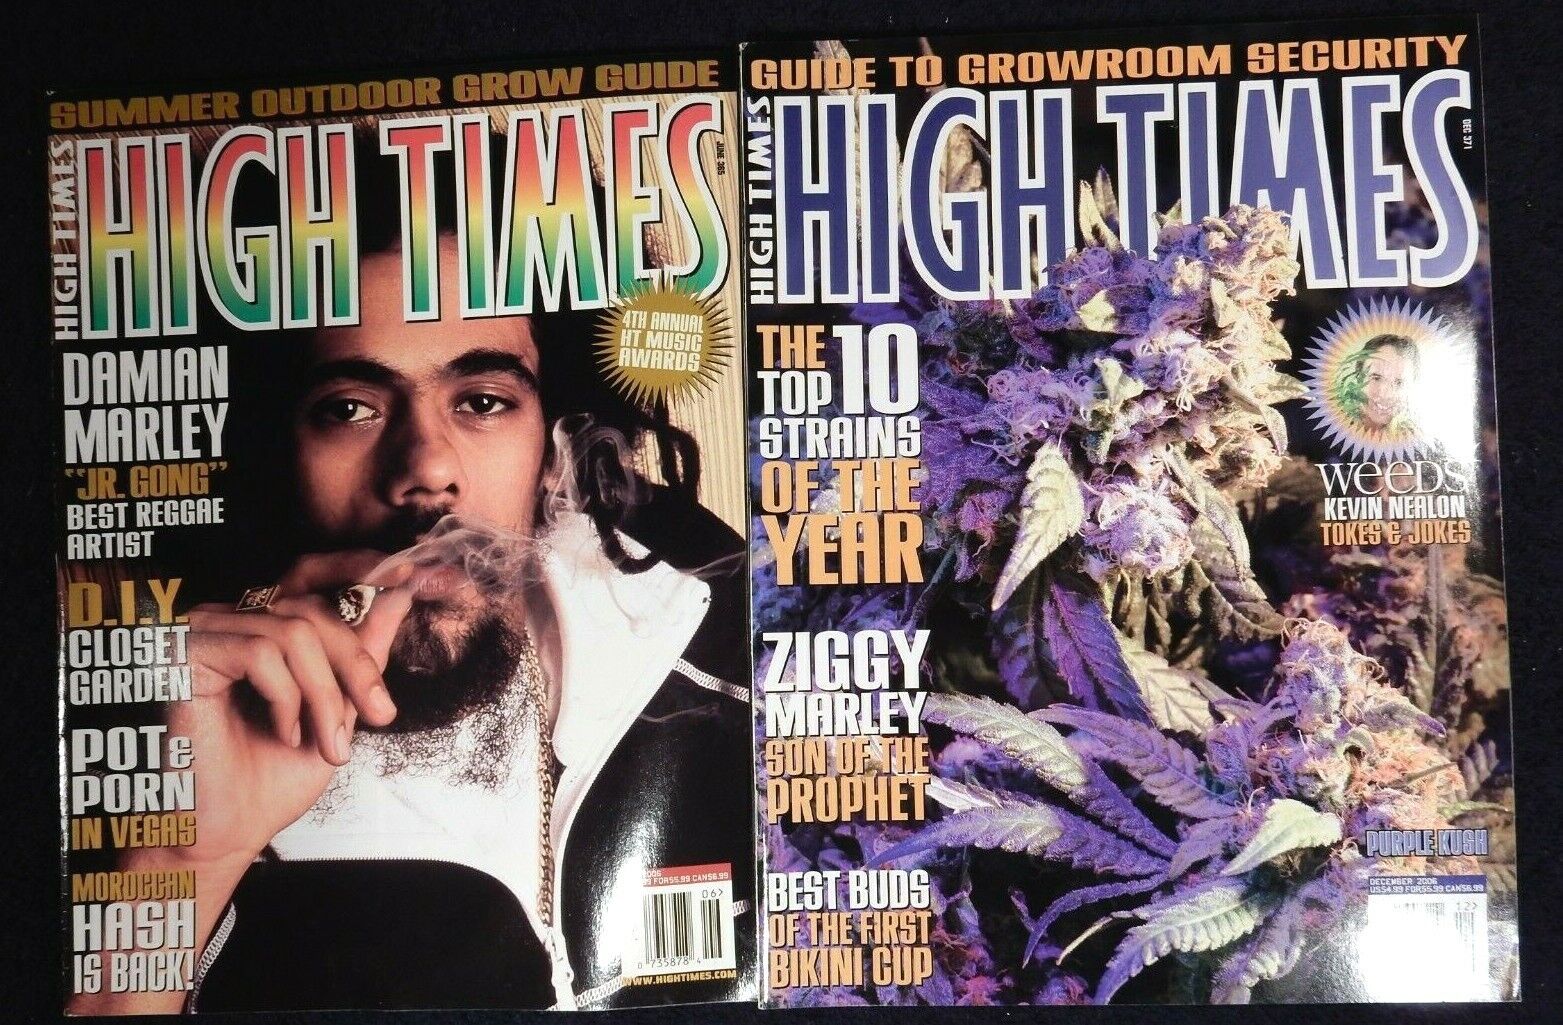 Damian Marley, Ziggy Marley High Times - LOT OF 2 Rare Magazines +Security guide Без бренда